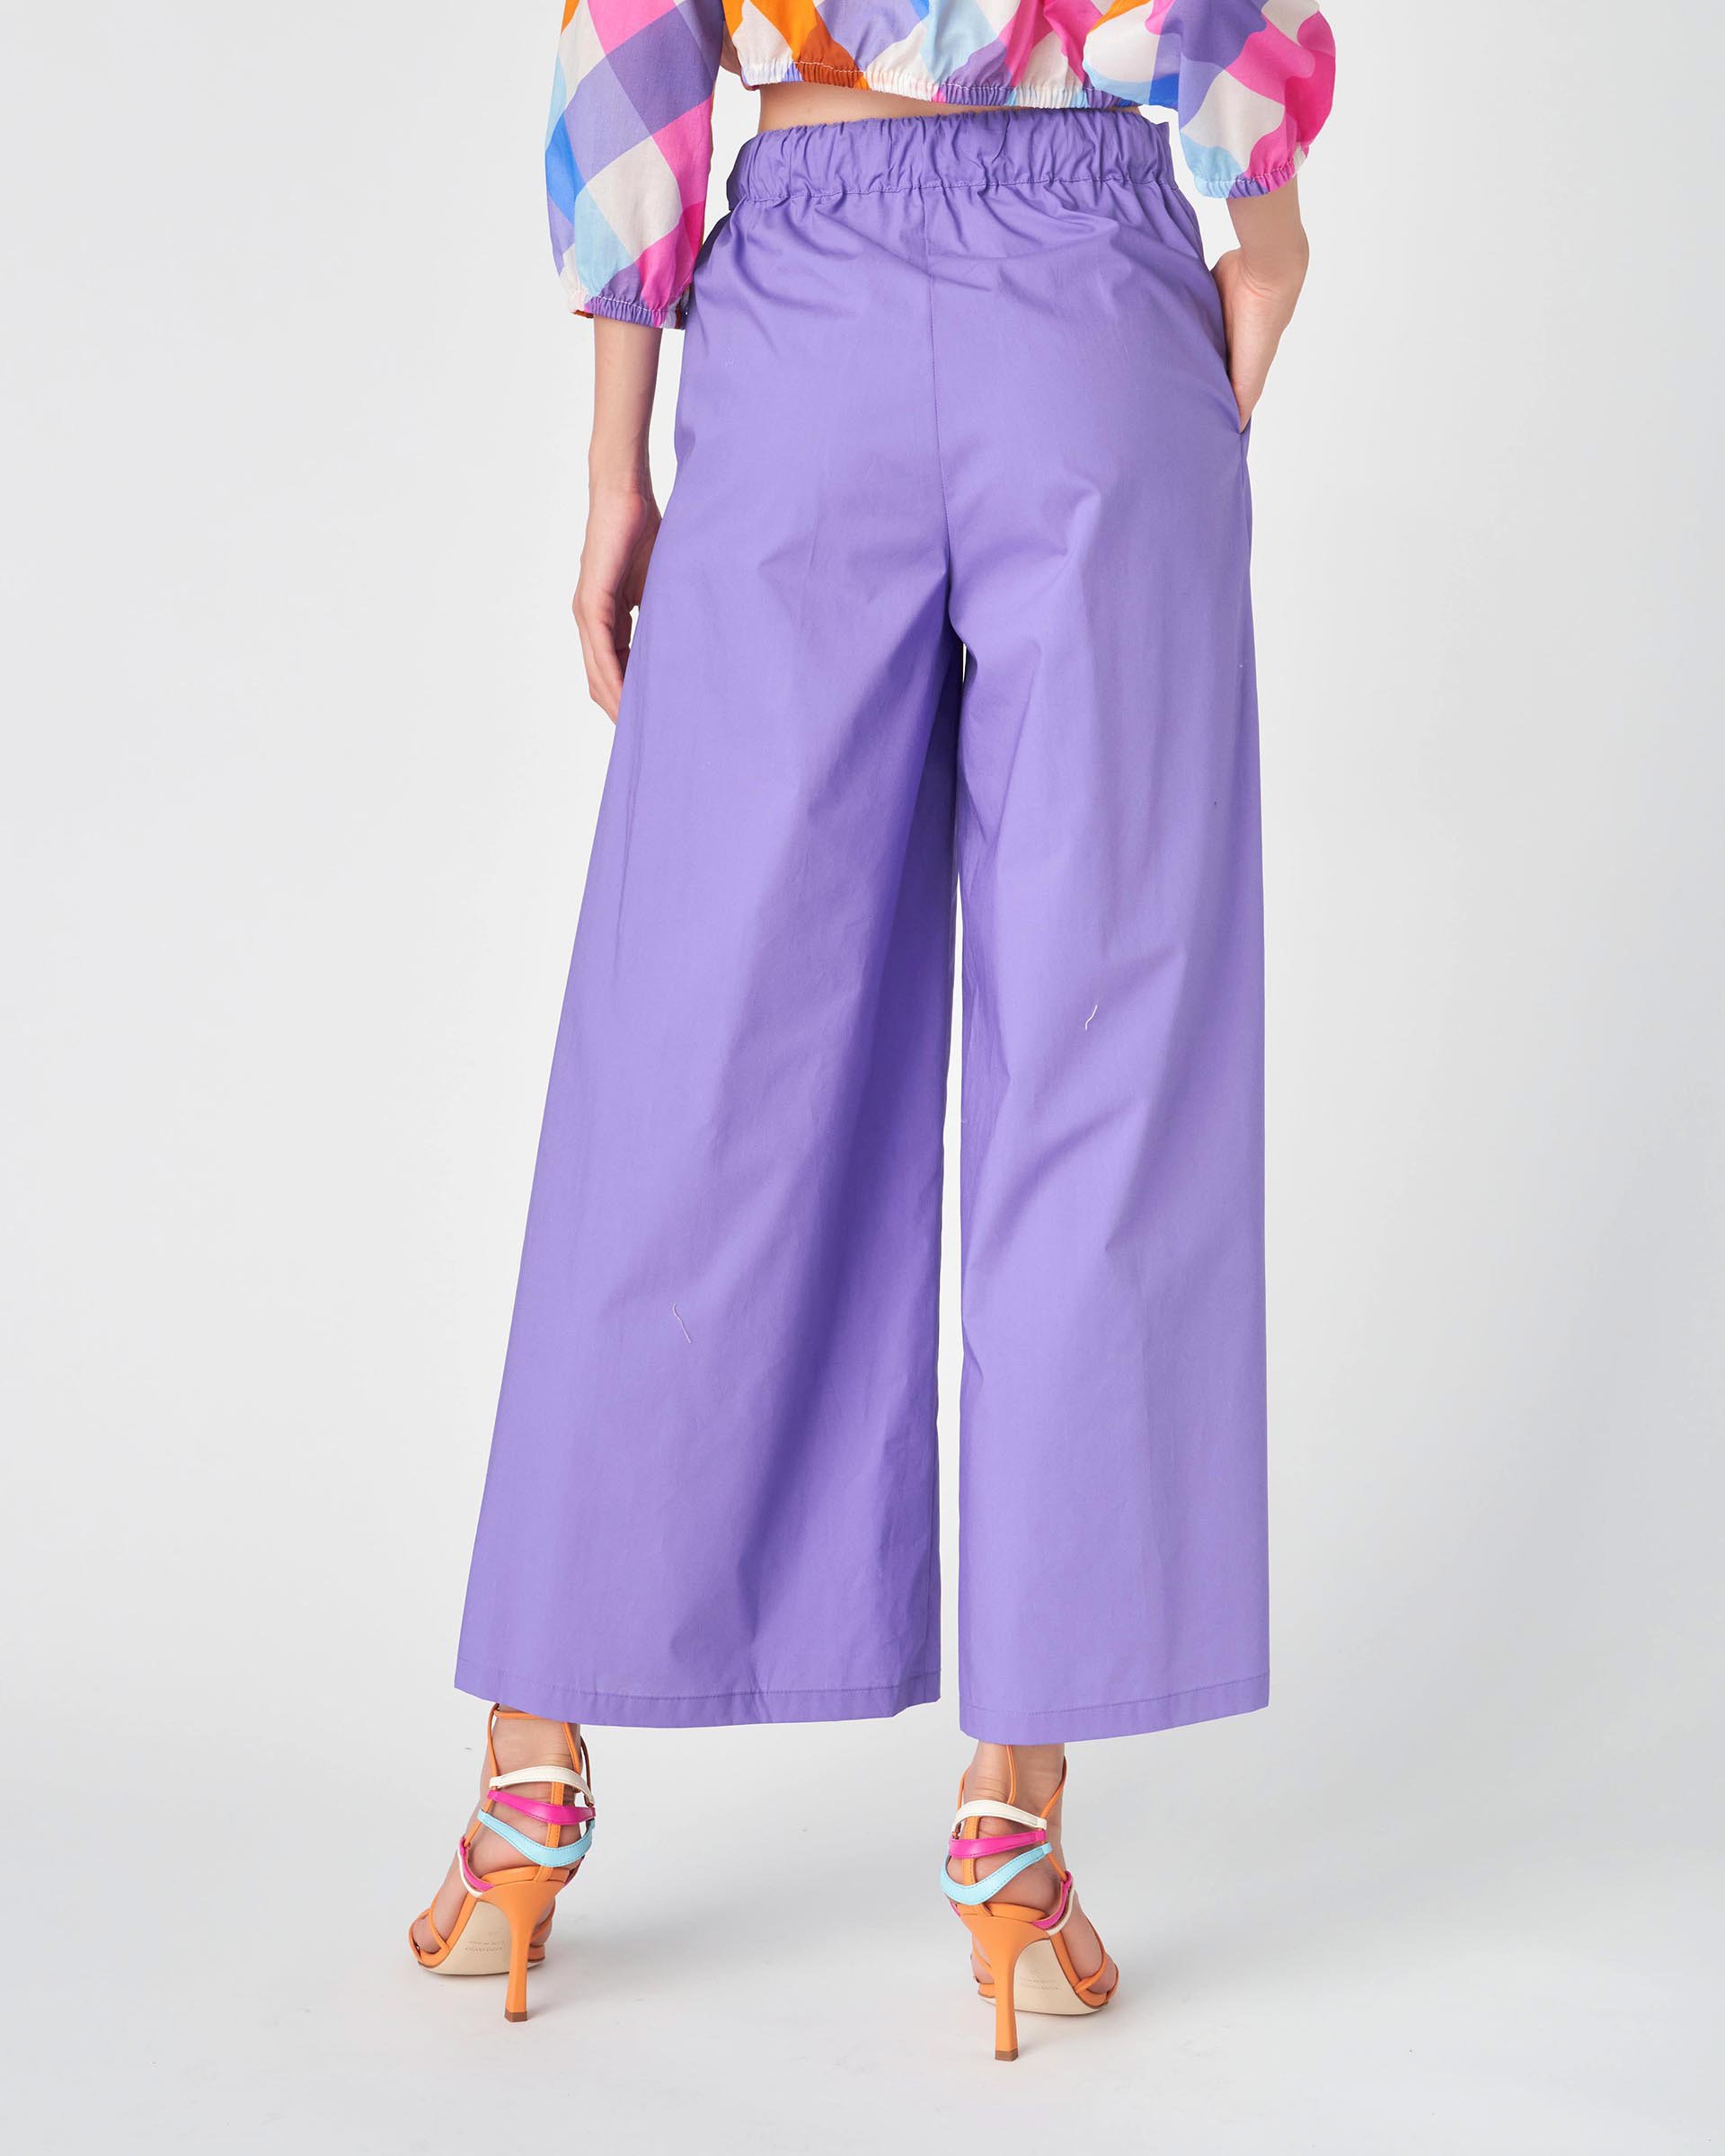 The Market Store | Pants With Matching Waistband